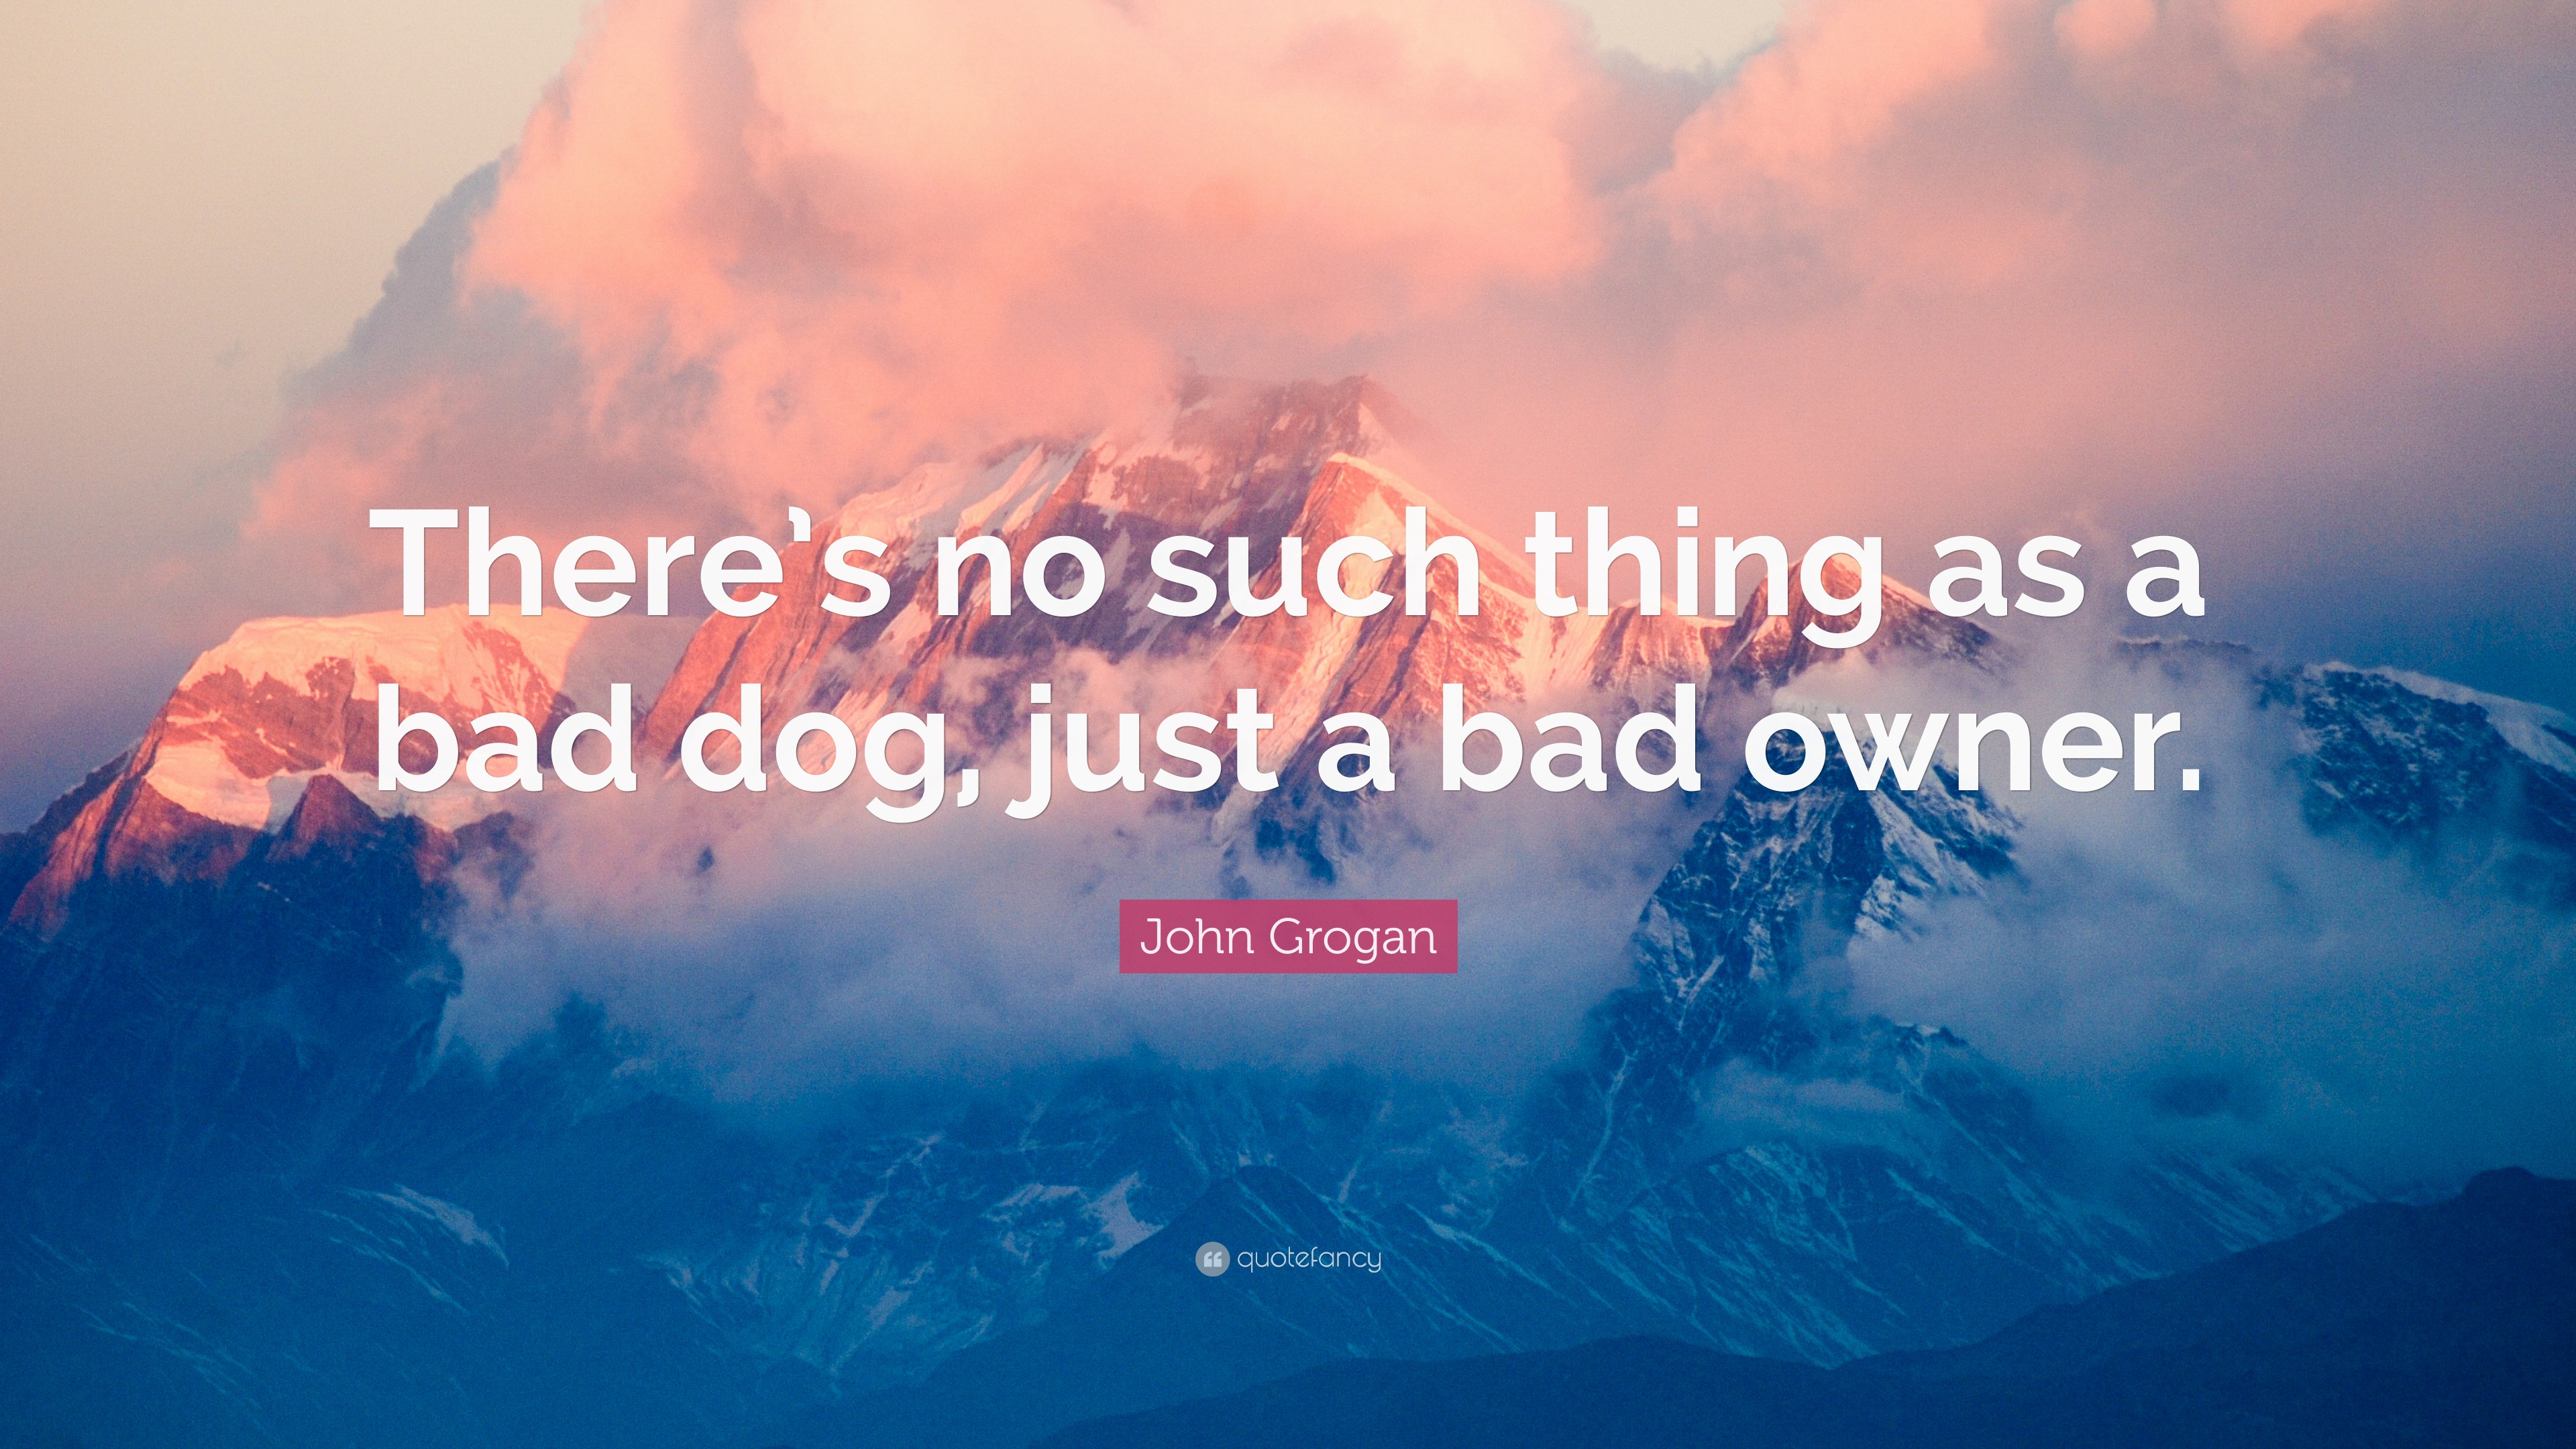 John Grogan Quote: "There's no such thing as a bad dog ...